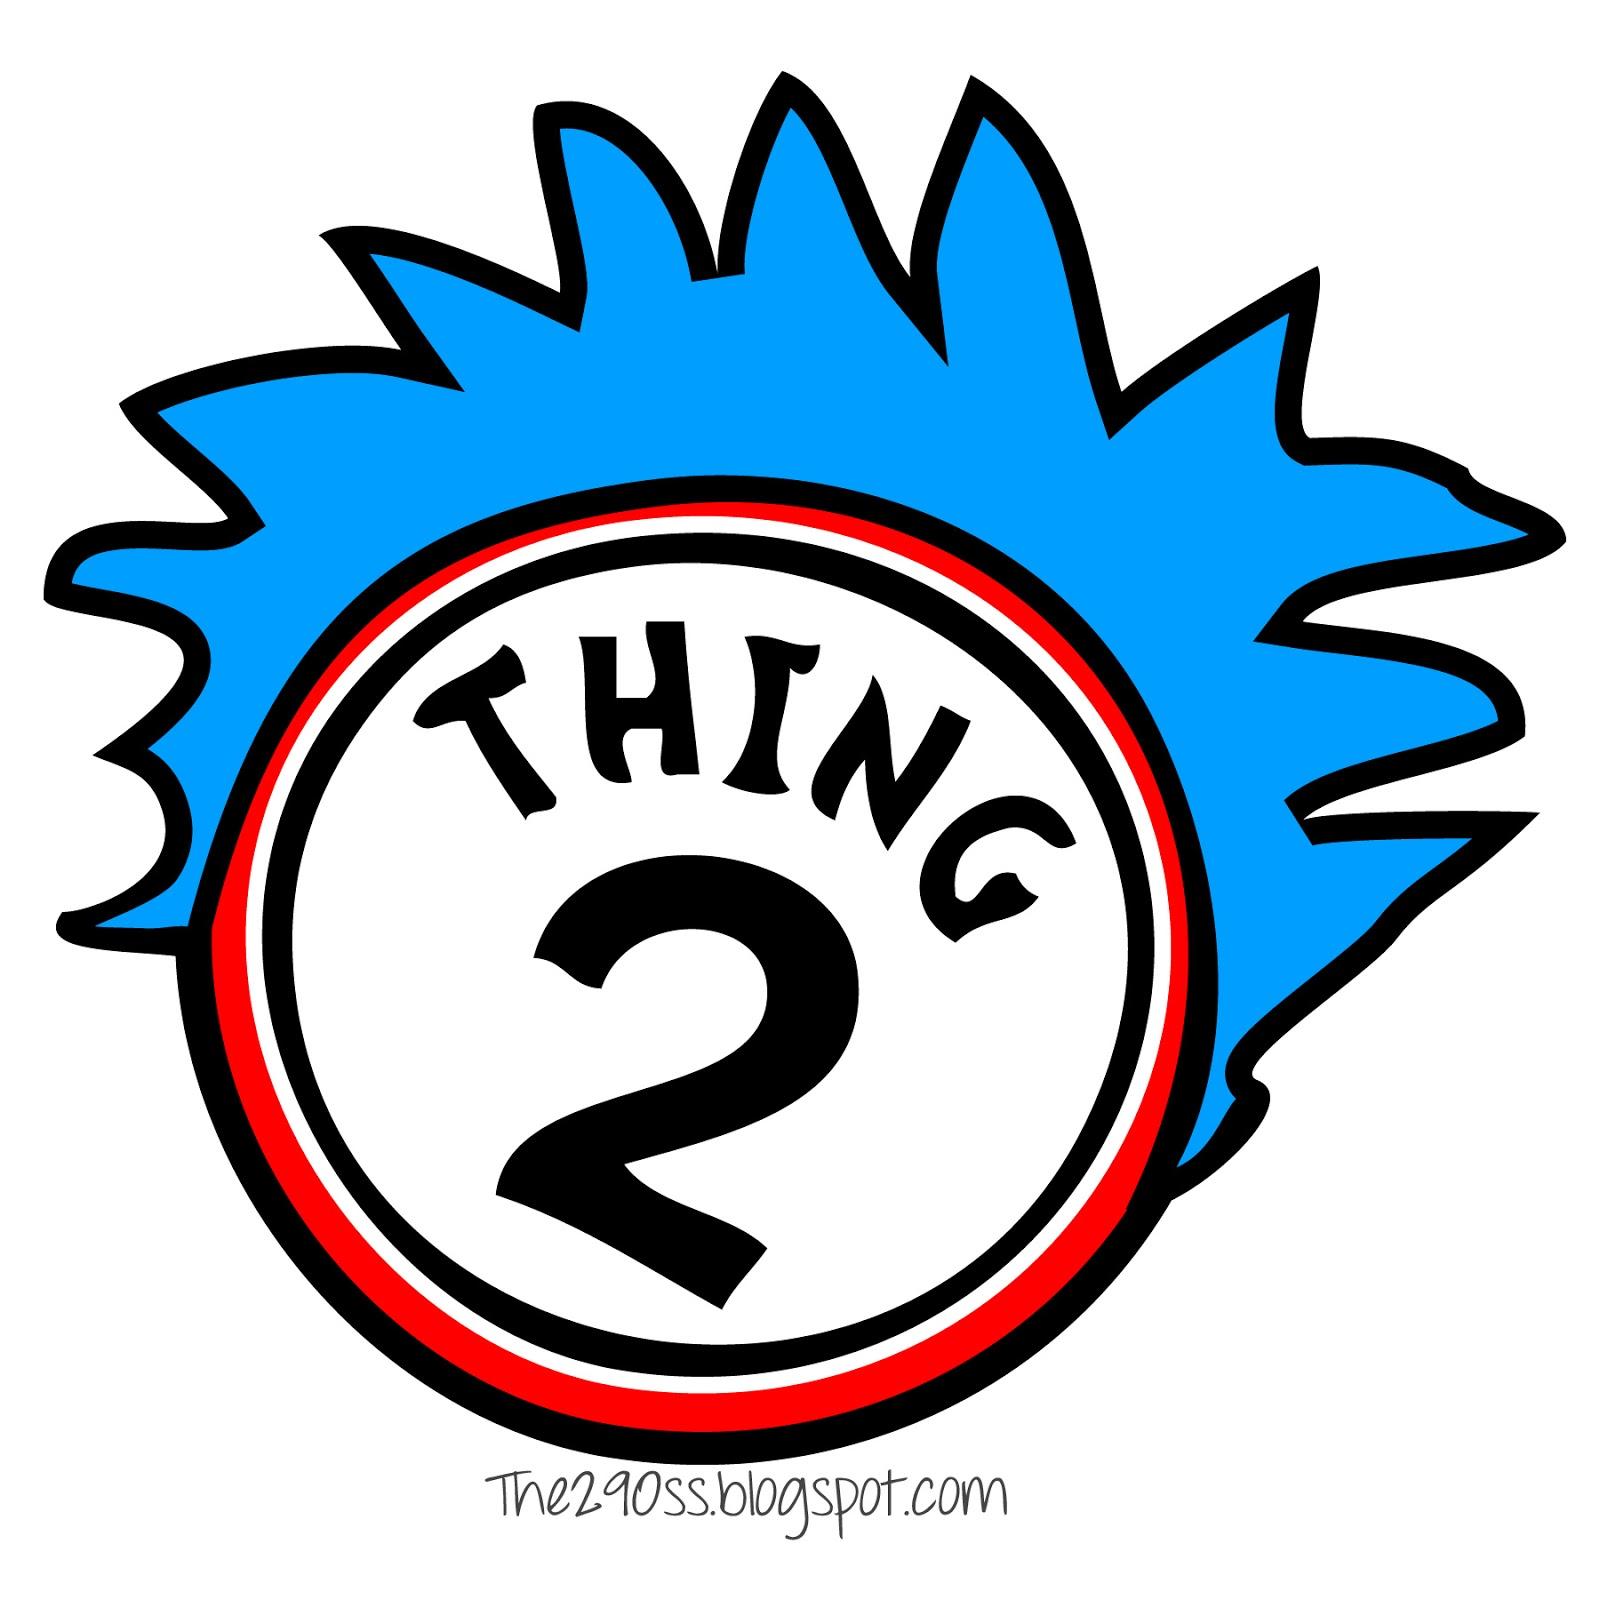 thing-1-and-thing-2-clip-art-tumundografico-clipart-best-clipart-best